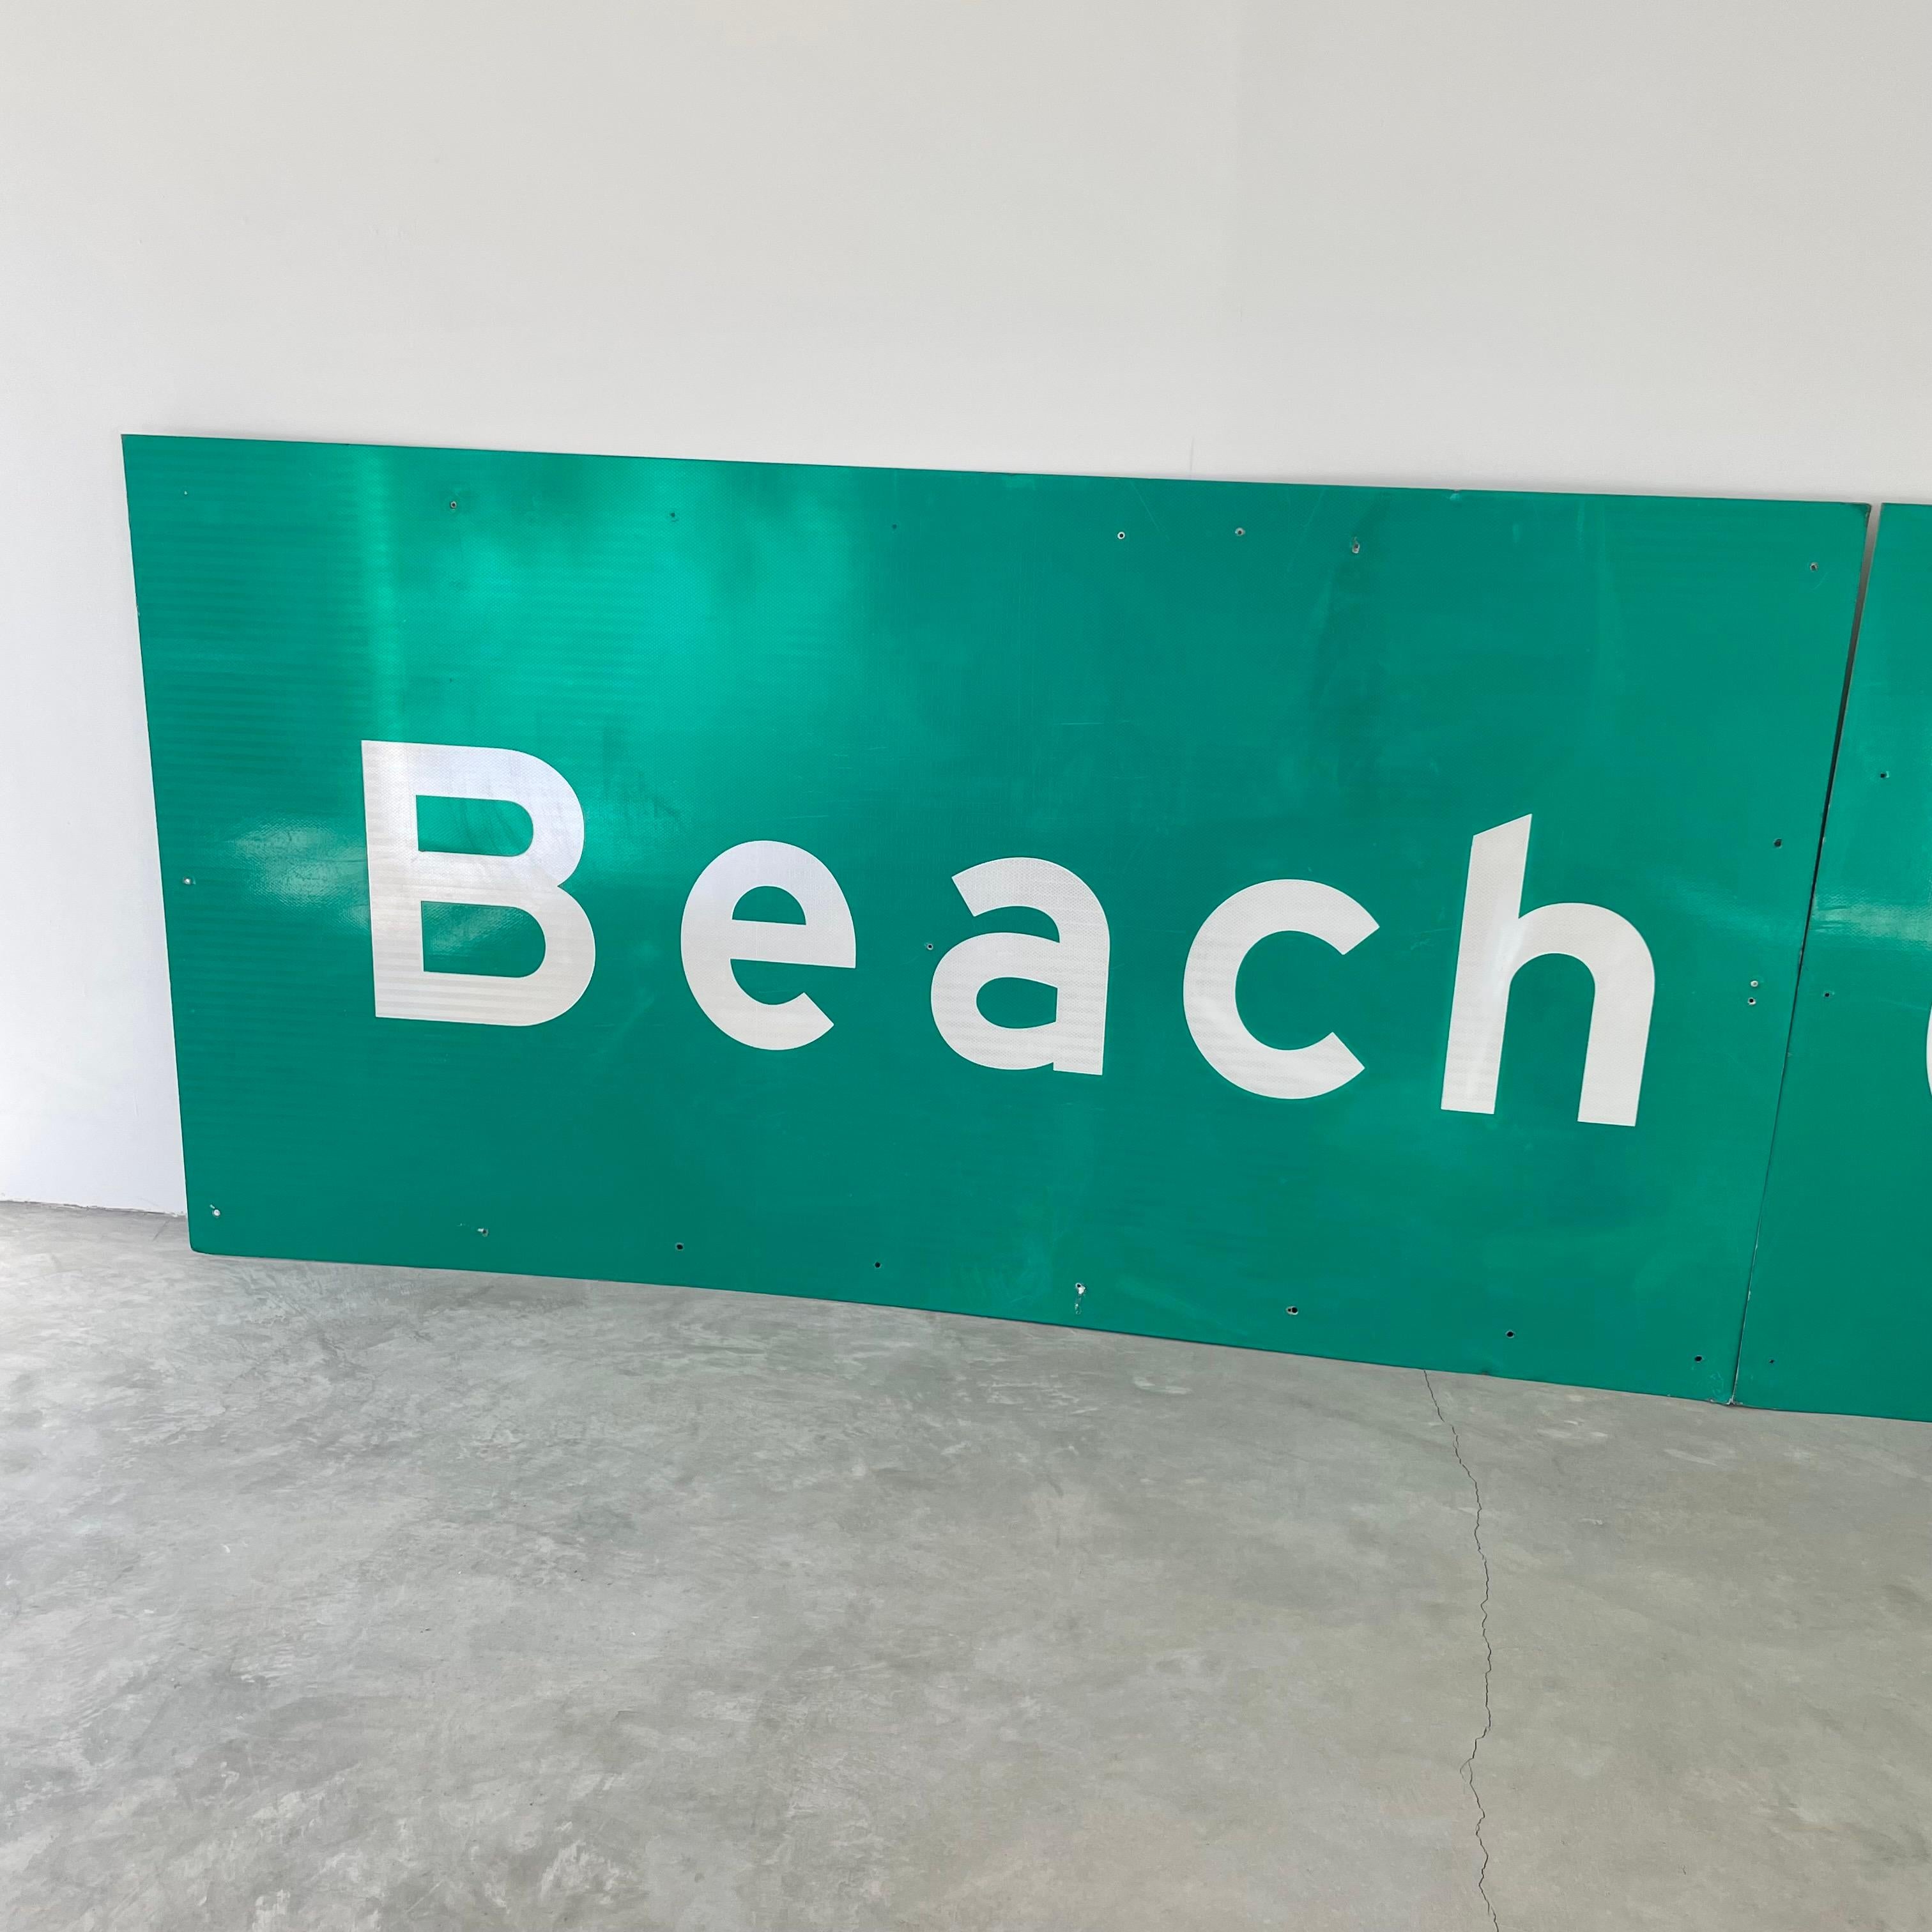 Los Angeles Freeway Sign 'Beach Cities